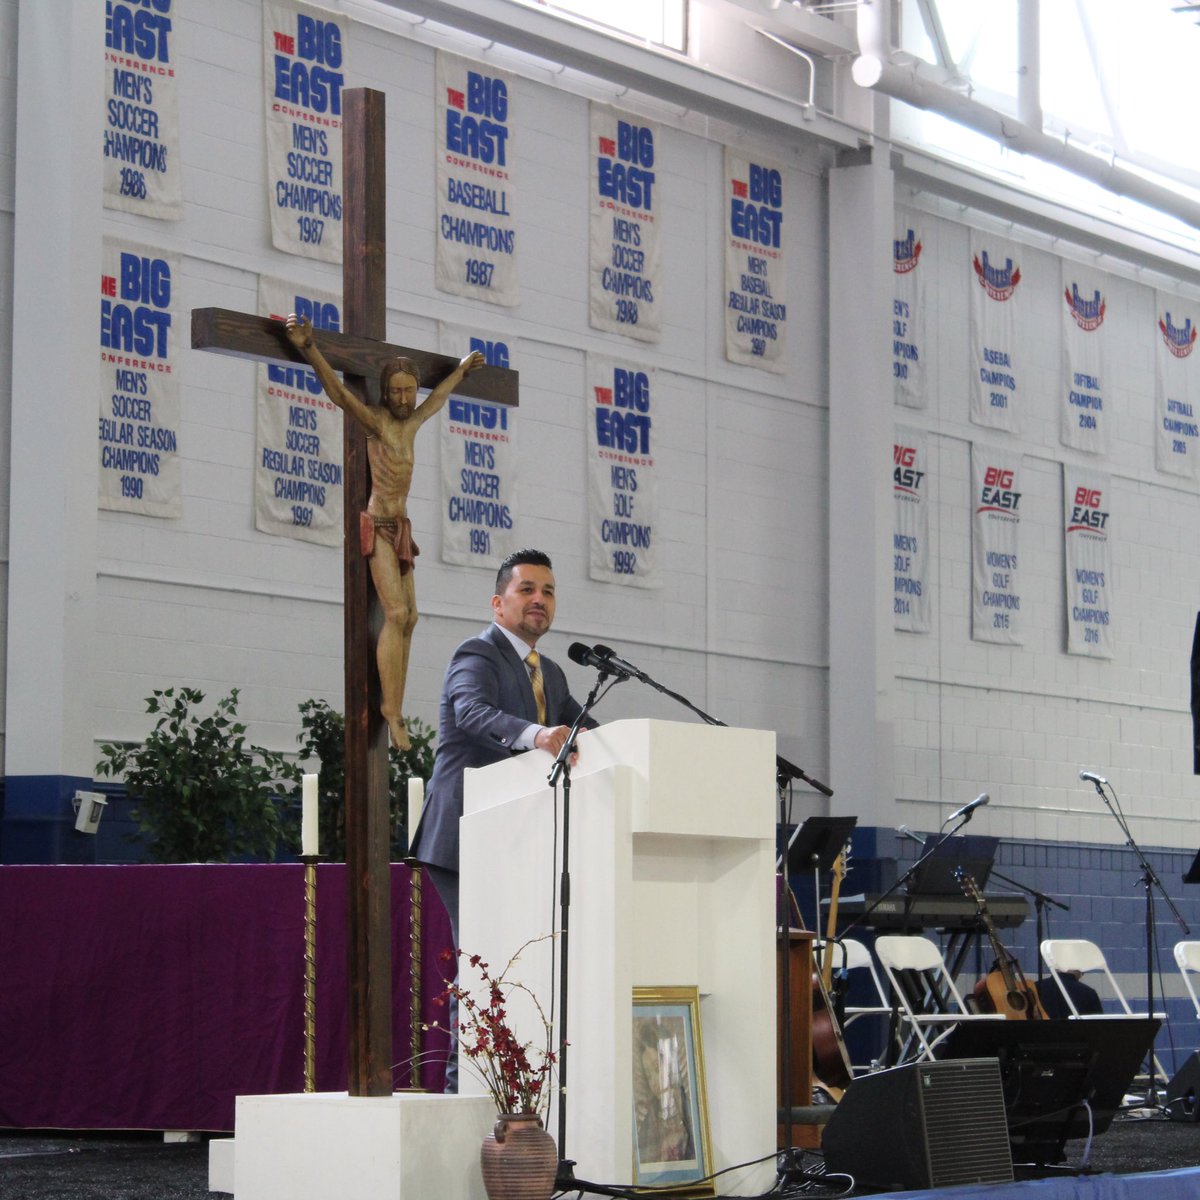 Some pictures from yesterday’s annual @NwkArchdiocese Men’s Conference at @SetonHall. Speakers were Catholic Evangelist & Radio Host Jesse Romero; Joe Lombardi (New Orleans @Saints Quarterback Coach & Grandson of NFL legend Vince Lombardi); & @HectorMolinaJr of @CastingNets.